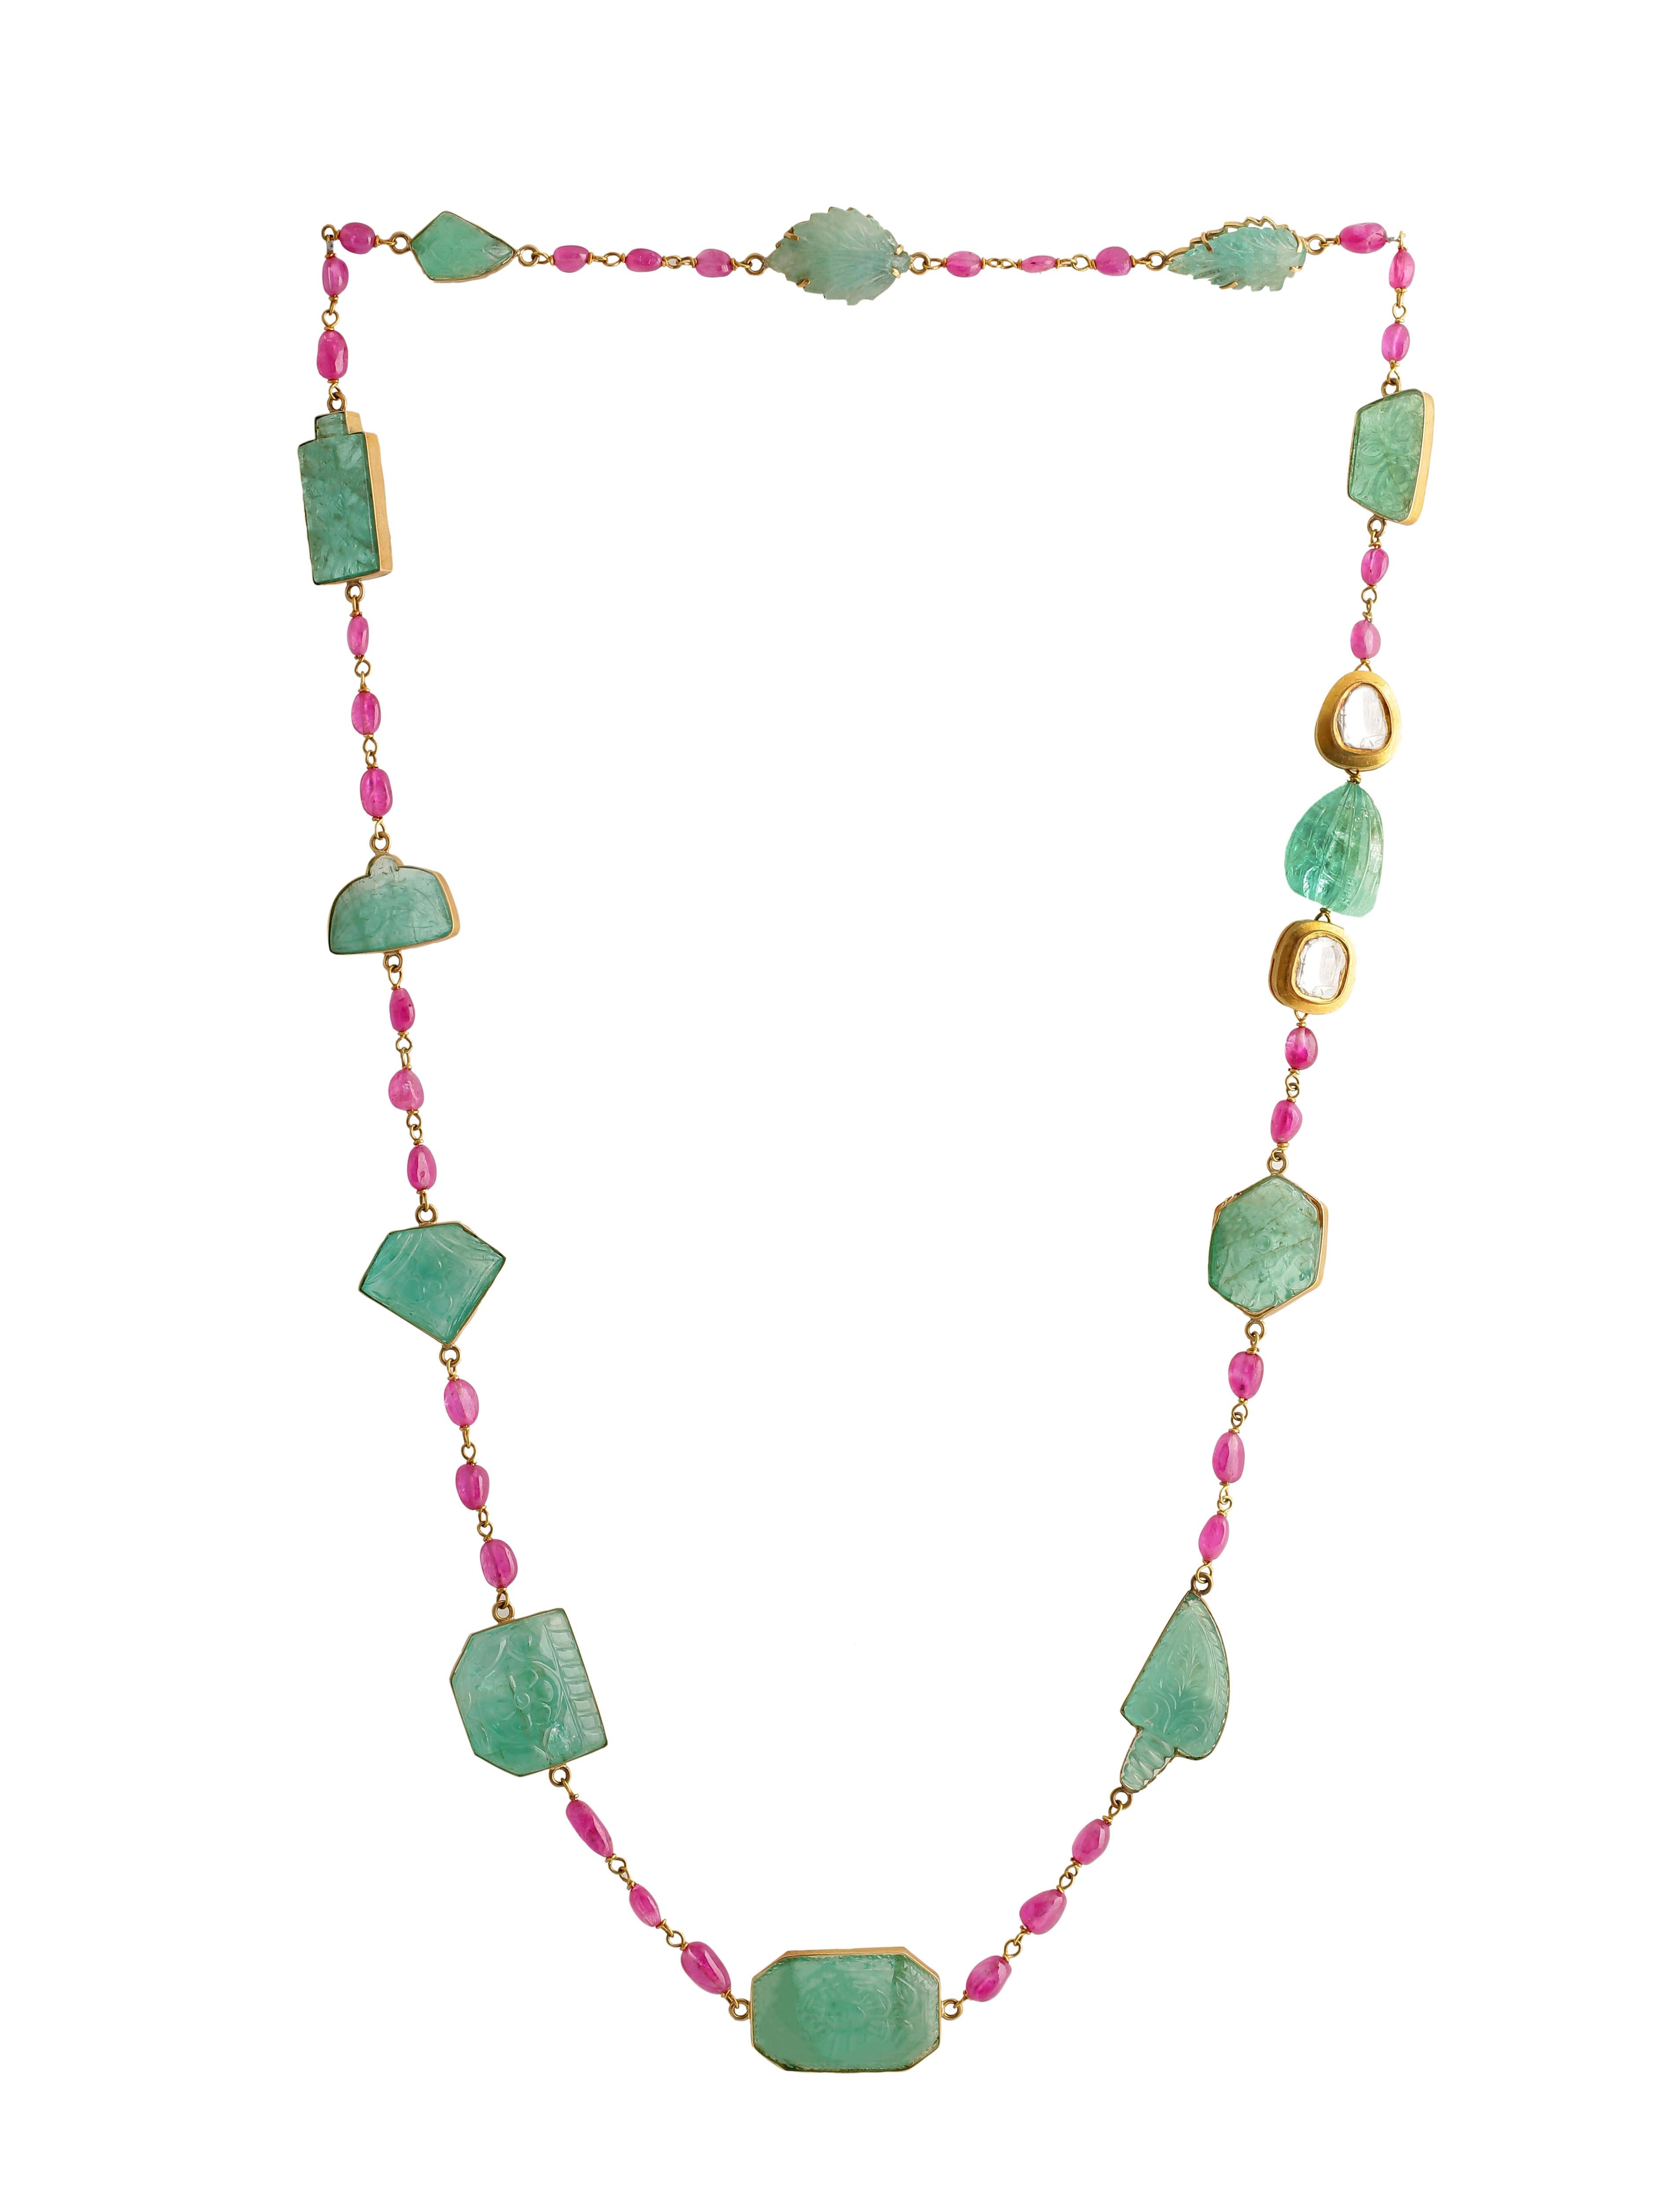 A beautiful necklace with Carved Colombian Natural Emeralds set in 18K Gold and strung with Rubies in a Gold wire. The Emeralds are all hand-carved each with a different carving inspired by the flora and Fauna around the state of Rajasthan. Carvings